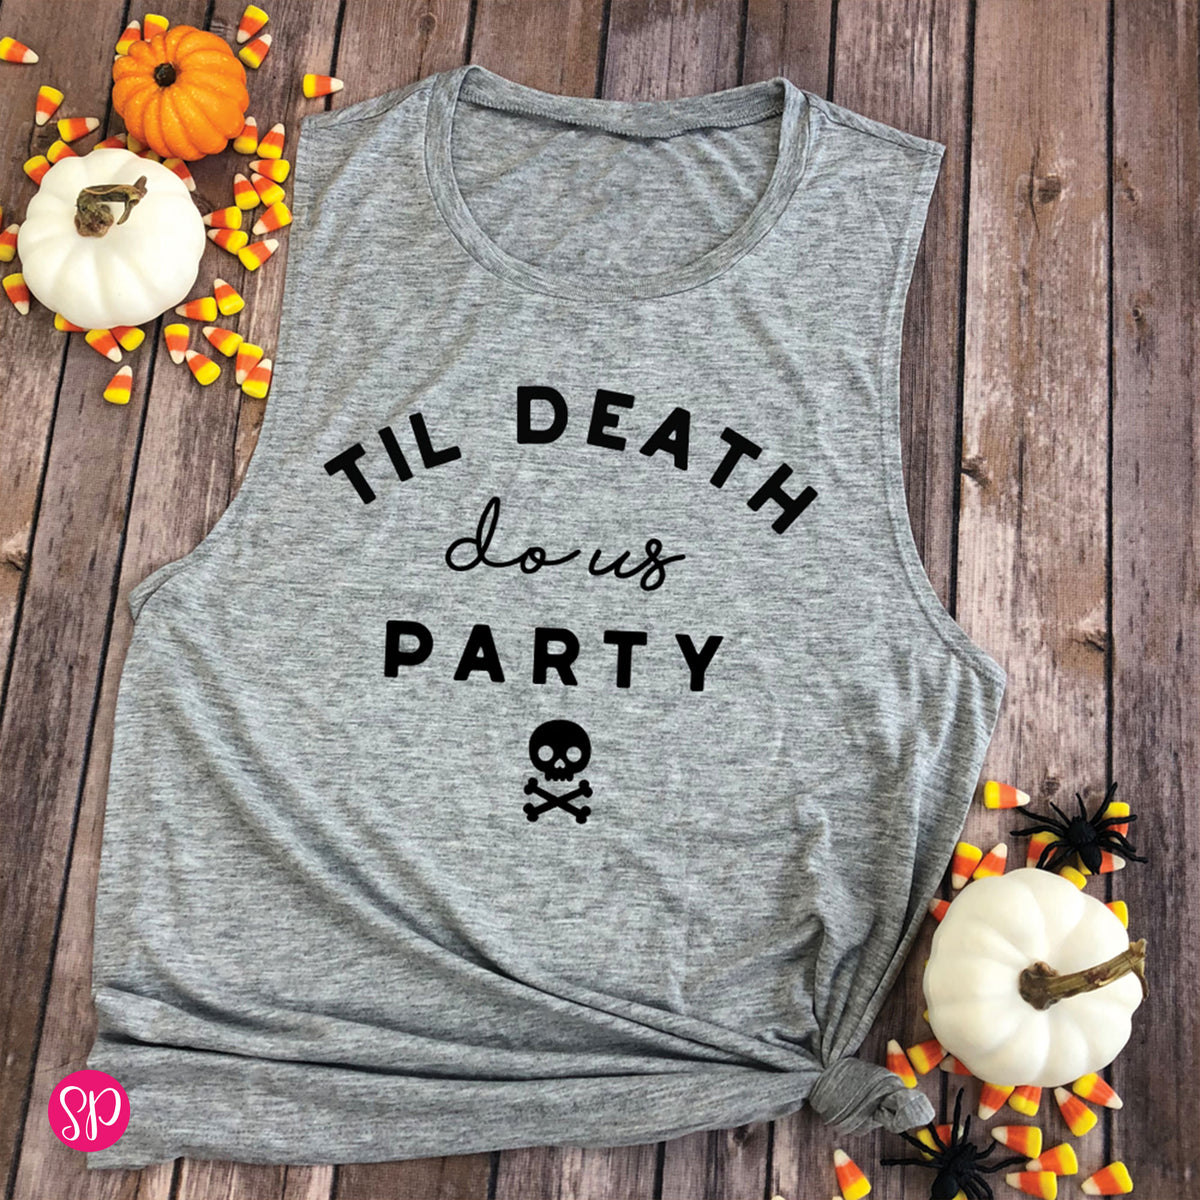 Til Death Do Us Party Skeleton Halloween Girls Night Out Bachelorette Party Graphic Tank Top Shirt